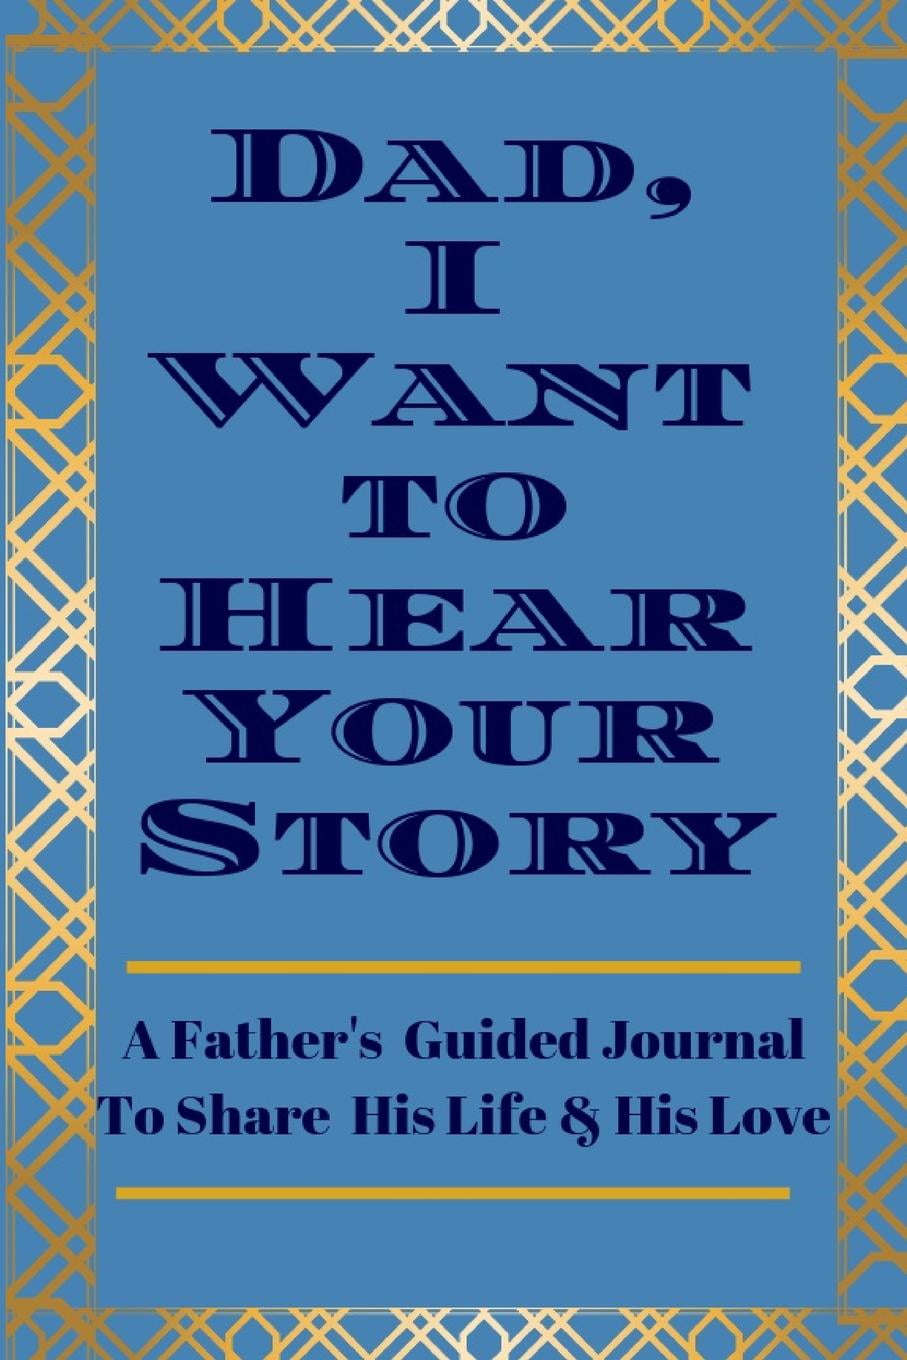 Dad A father's life story journal to fill in and give back What's Your Story?